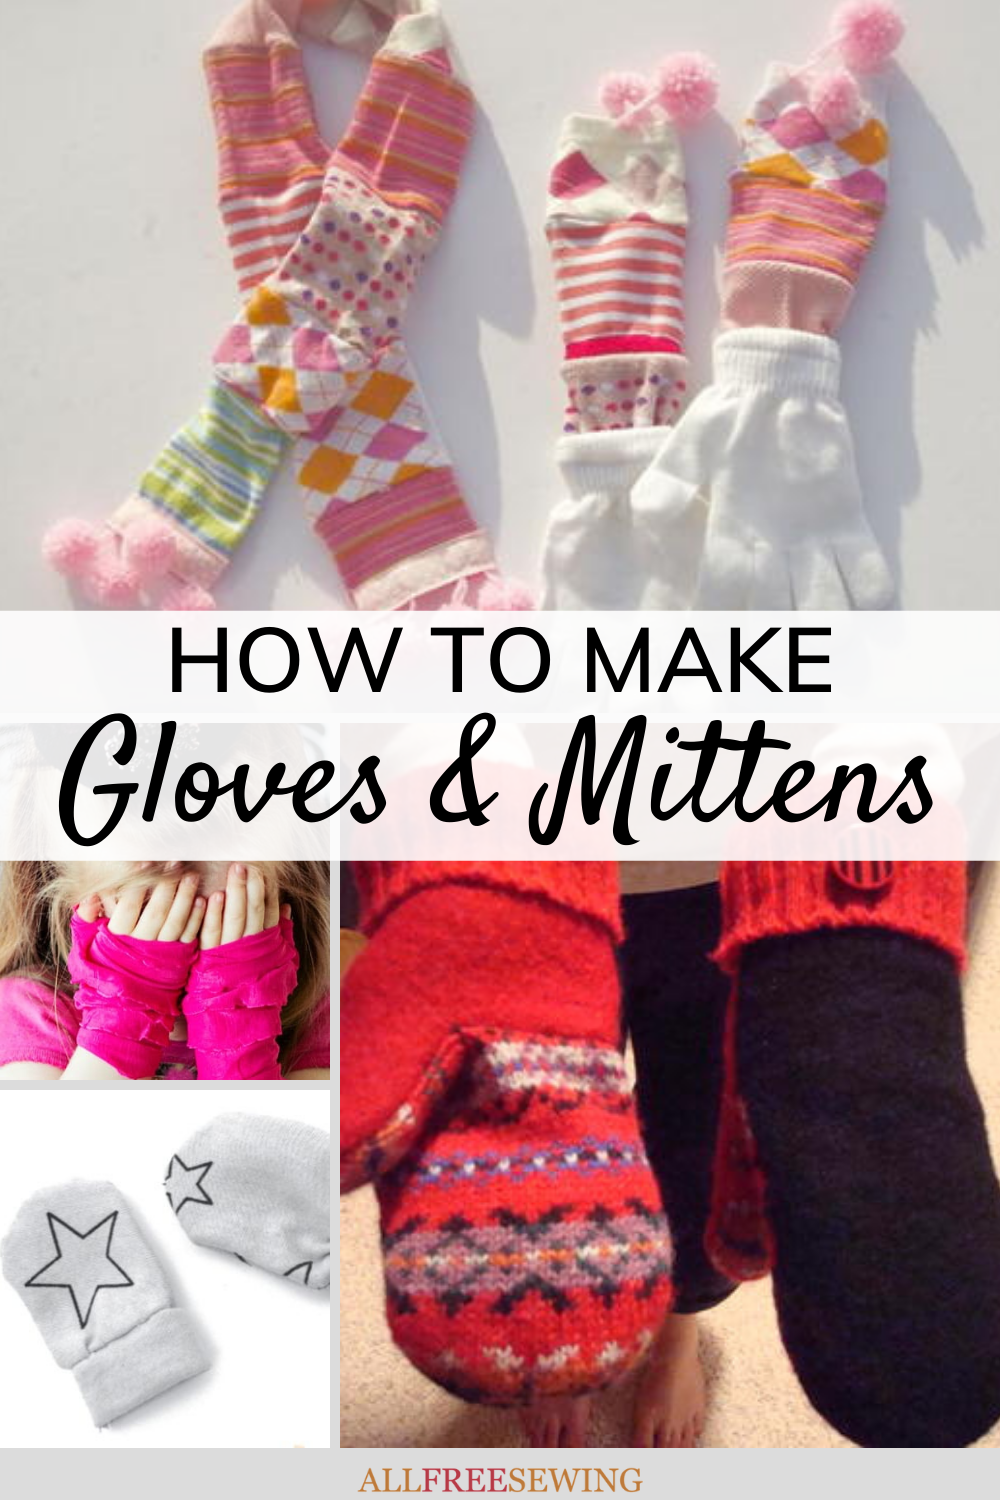 Making Chainmail Gloves And Mittens - Ironskin Tutorial